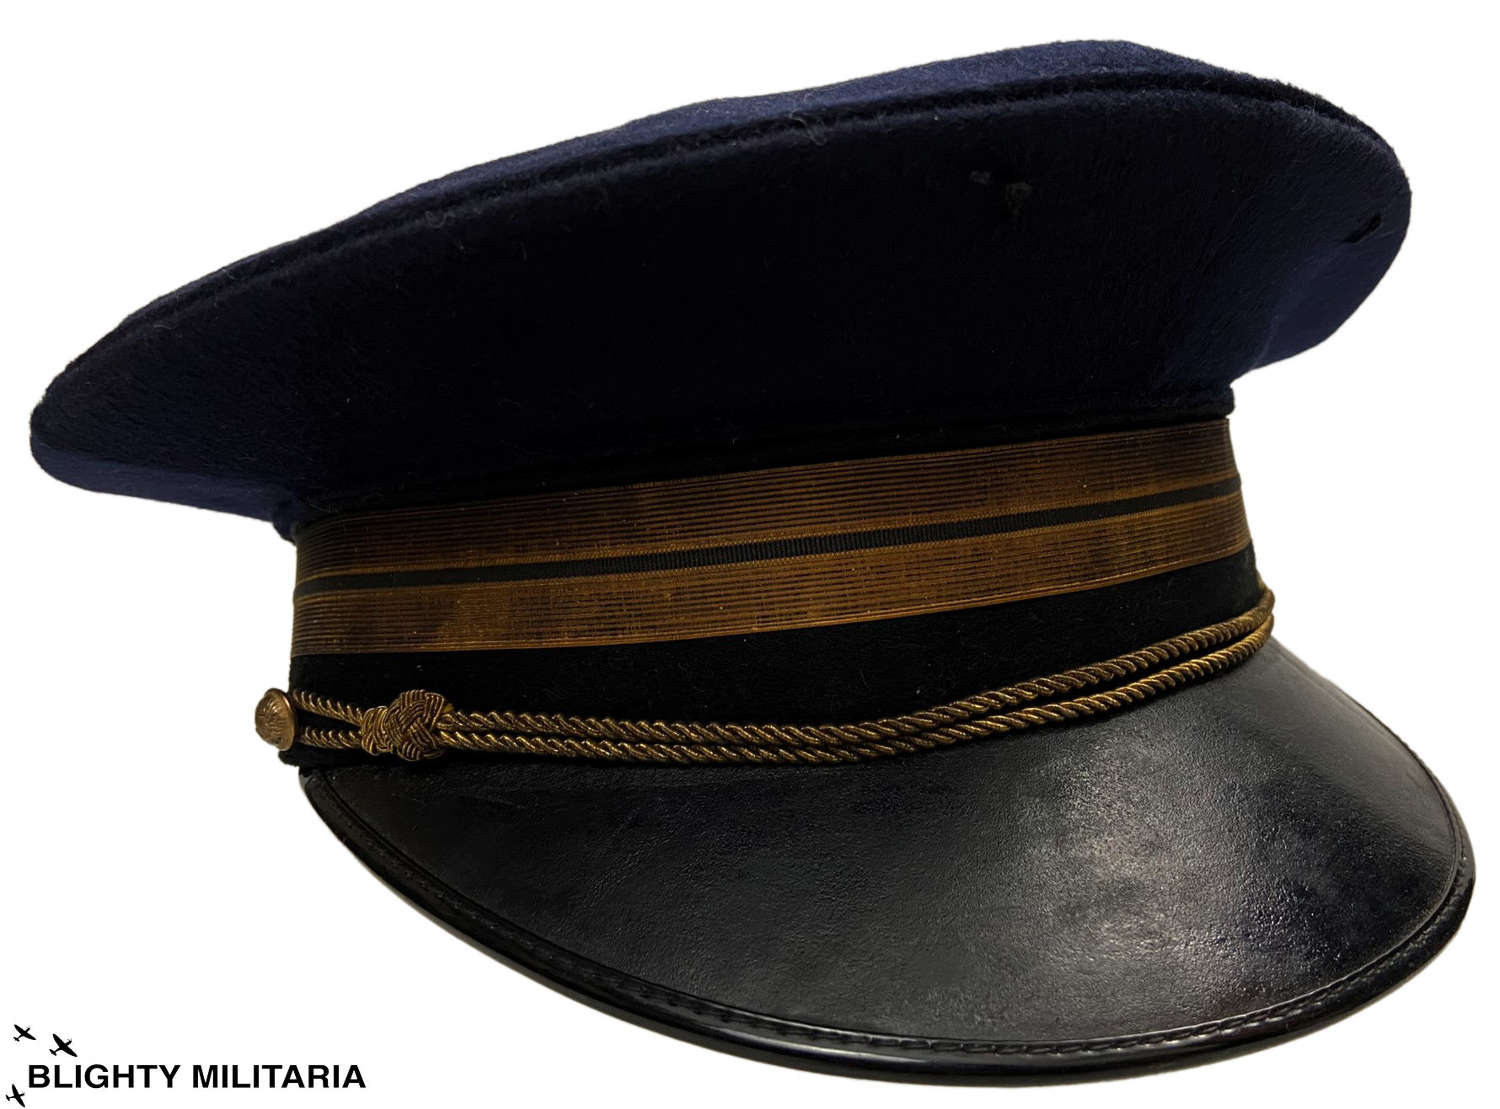 Original 1950s French Air Force Officers Peaked Cap